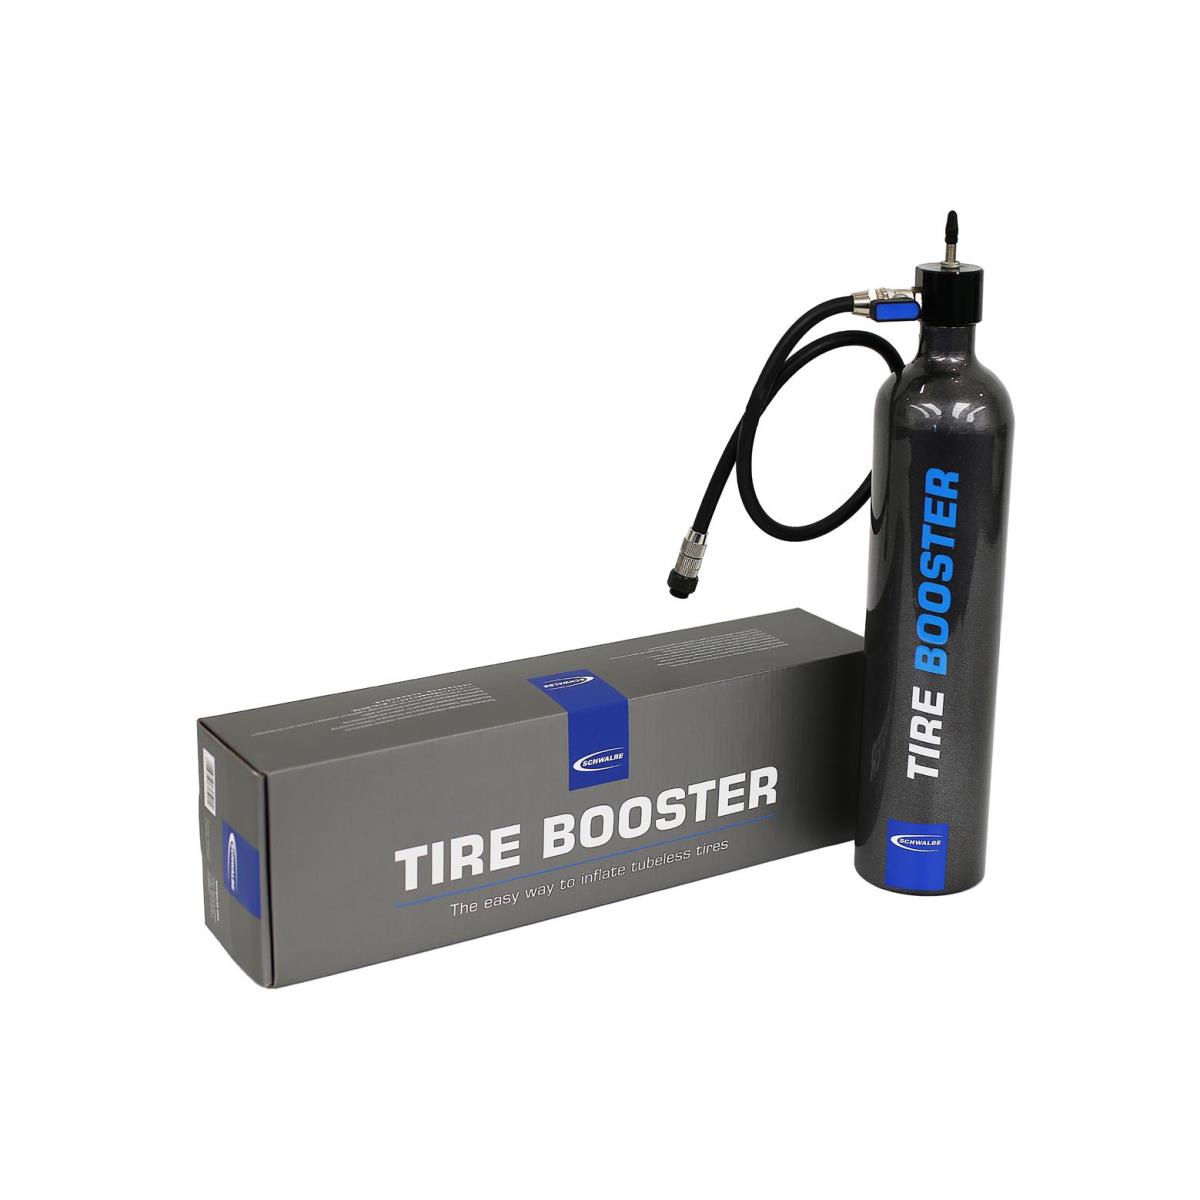 Tire Booster 11bar for Tubeless tires inflation